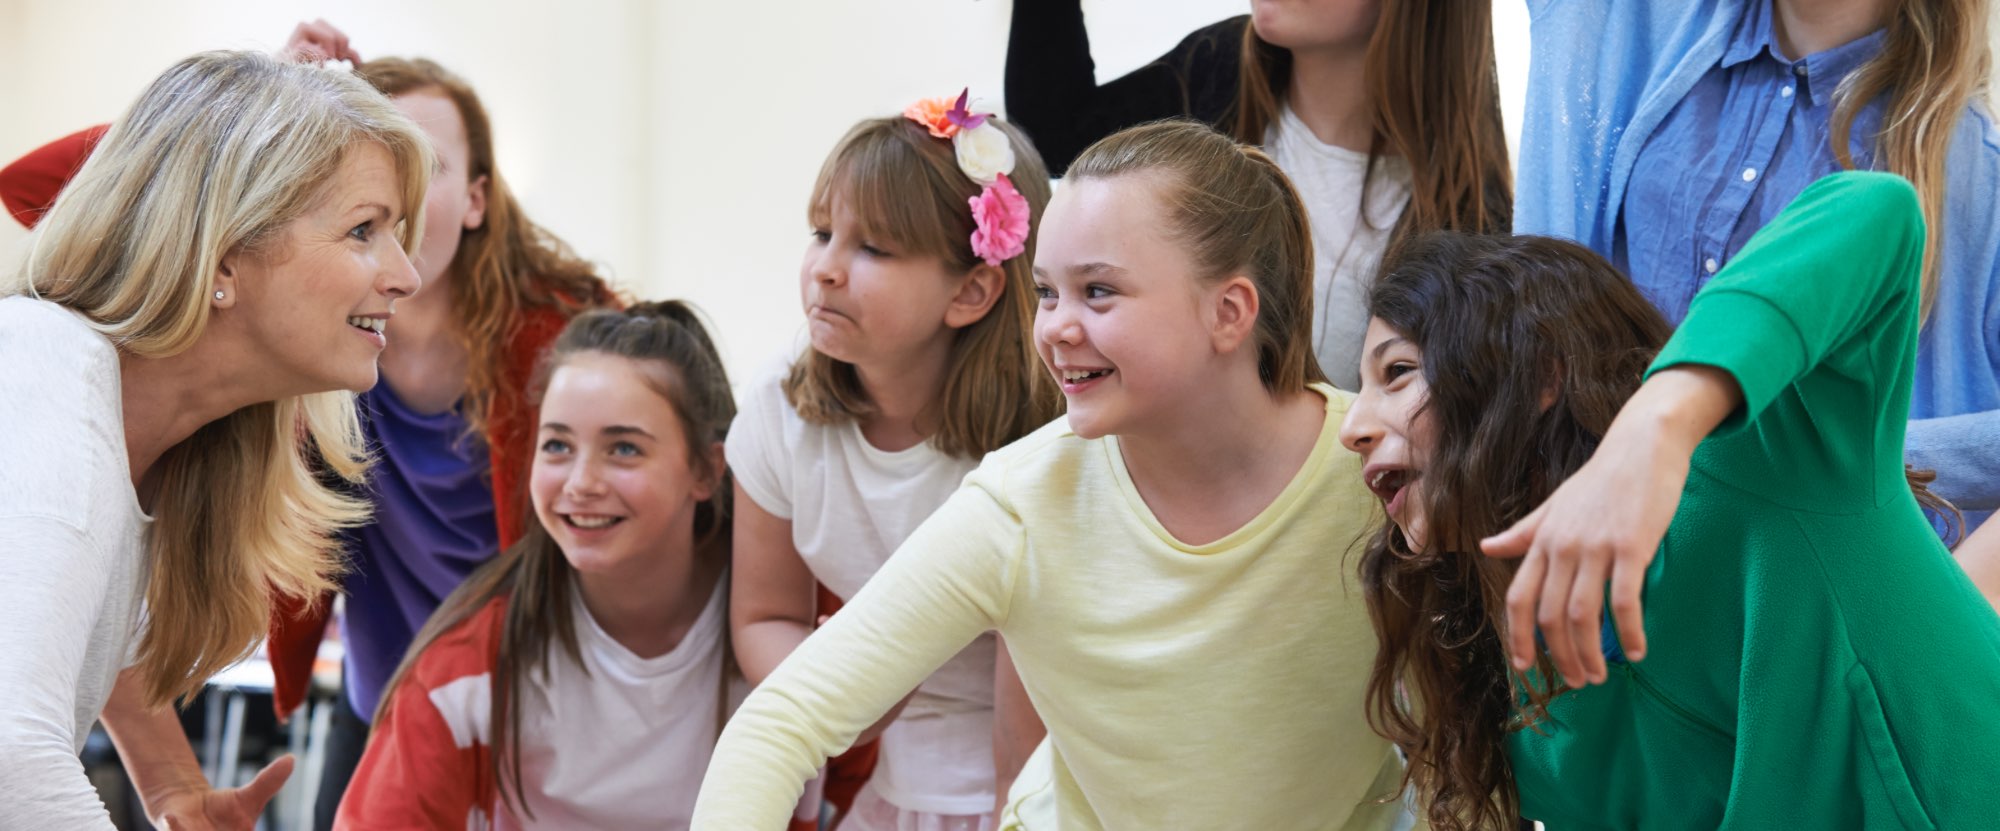 A group of girls are mid way through an acting or movement class. They are wearing brightly colooured tops. They are all looking at an adult who is a teacher, some are happy, some are having fun and one is pulling a silly face.